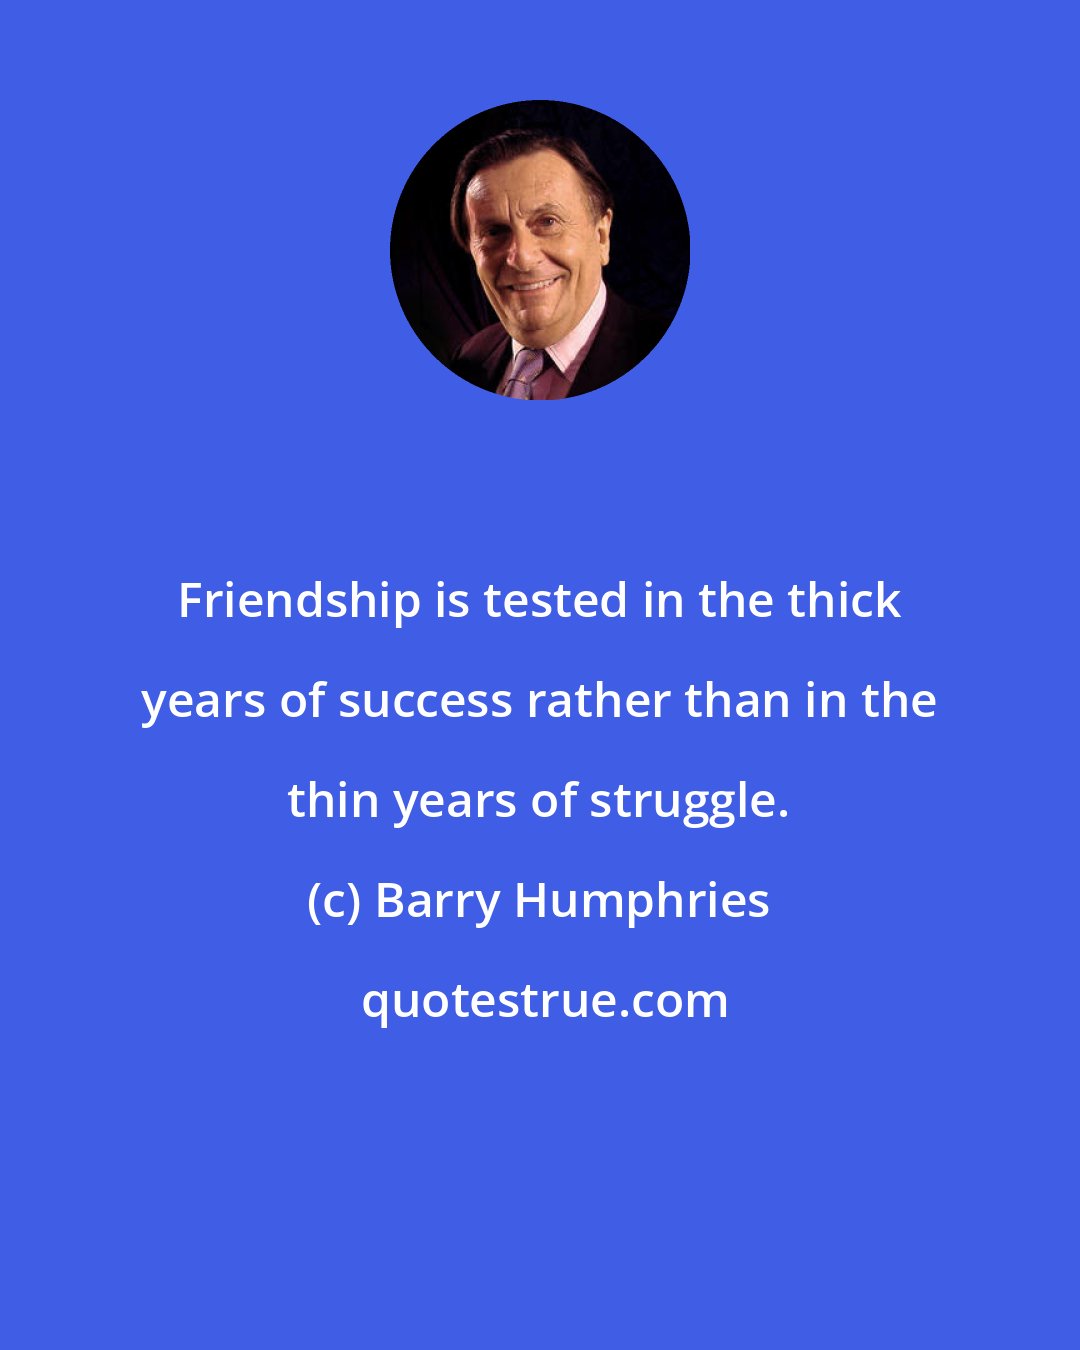 Barry Humphries: Friendship is tested in the thick years of success rather than in the thin years of struggle.